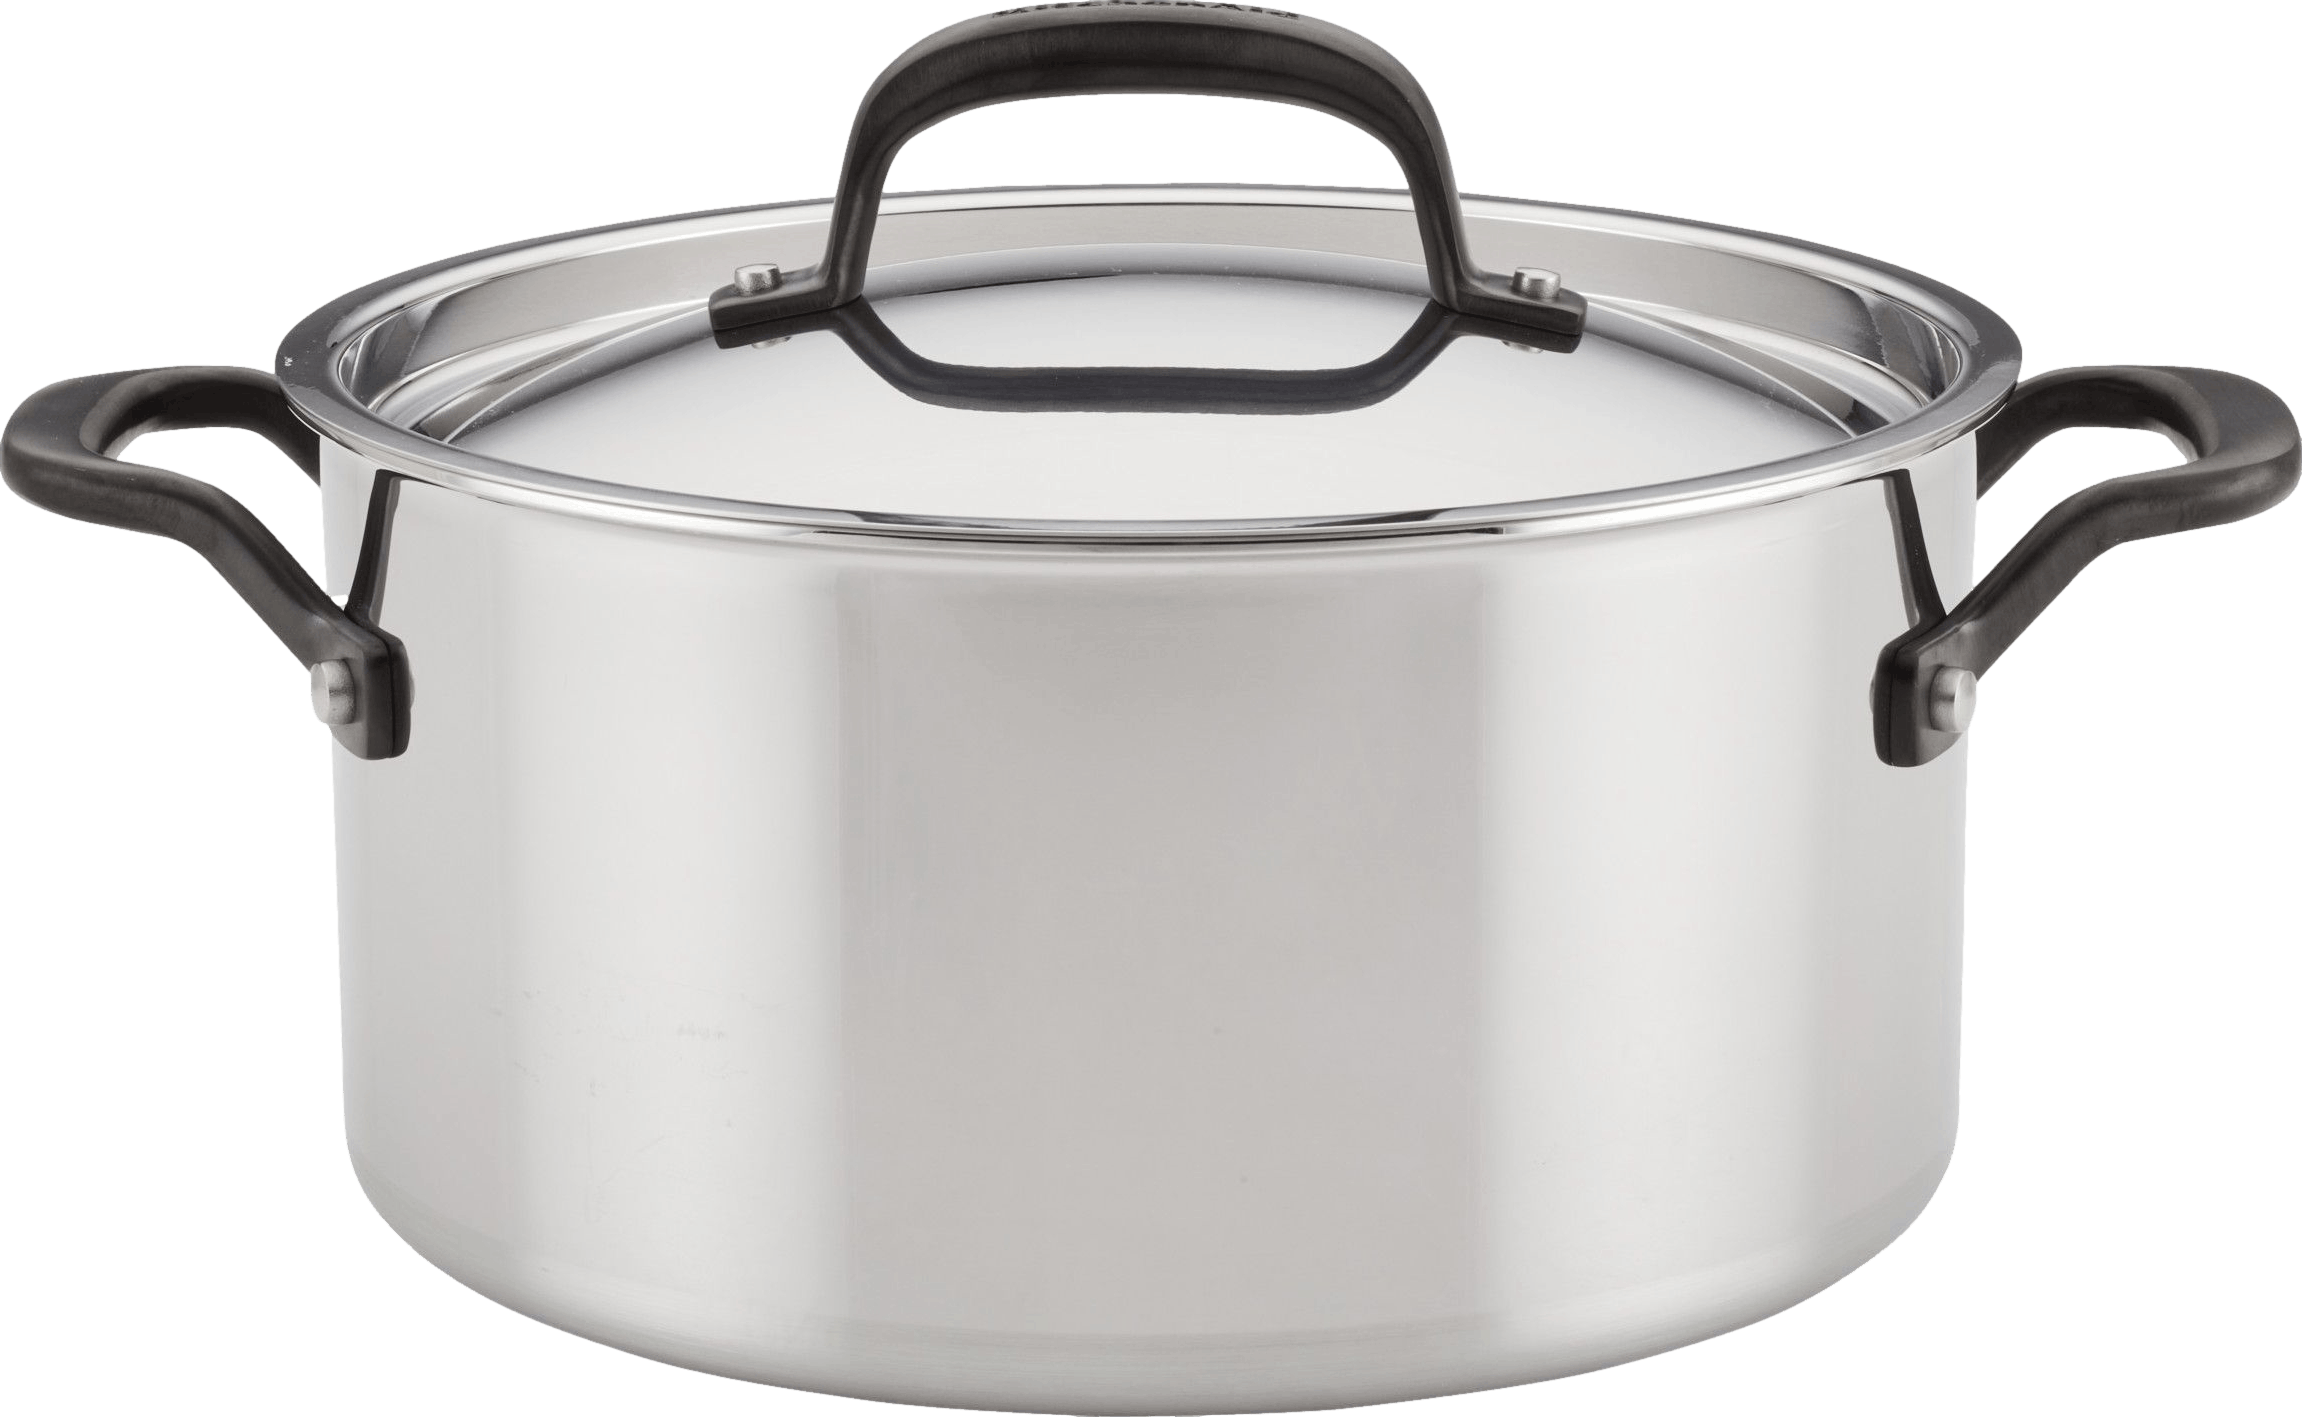 KitchenAid 5-Ply Clad Stainless Steel Induction Stockpot with Lid · 6 QT ·  Polished Stainless Steel